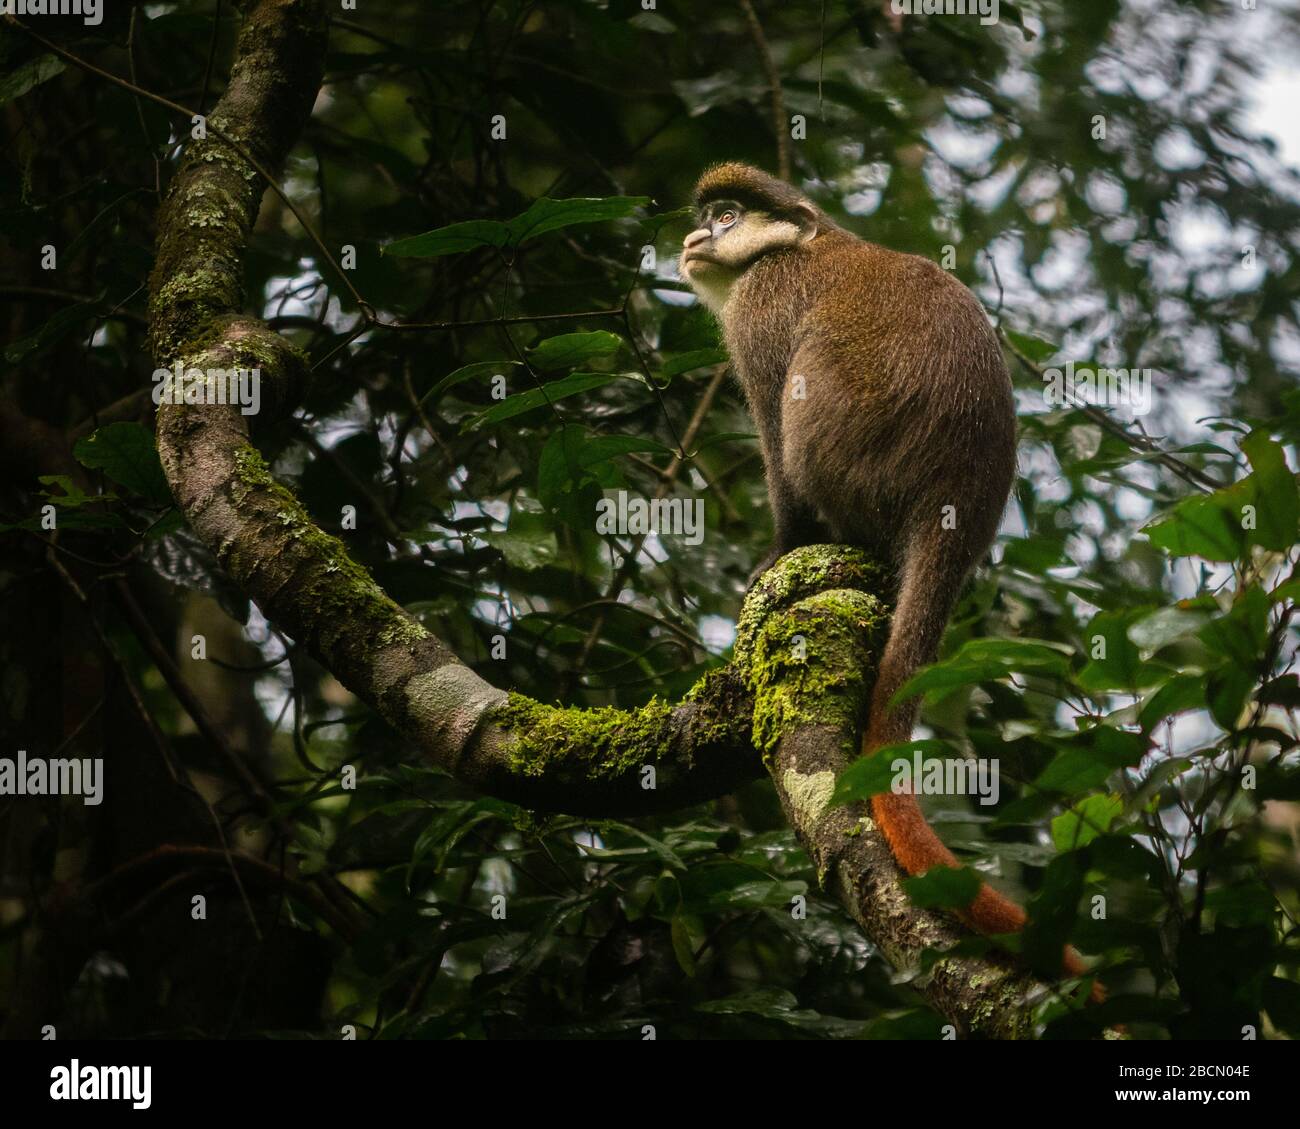 Roter Affe im Kibale Forest. Stockfoto